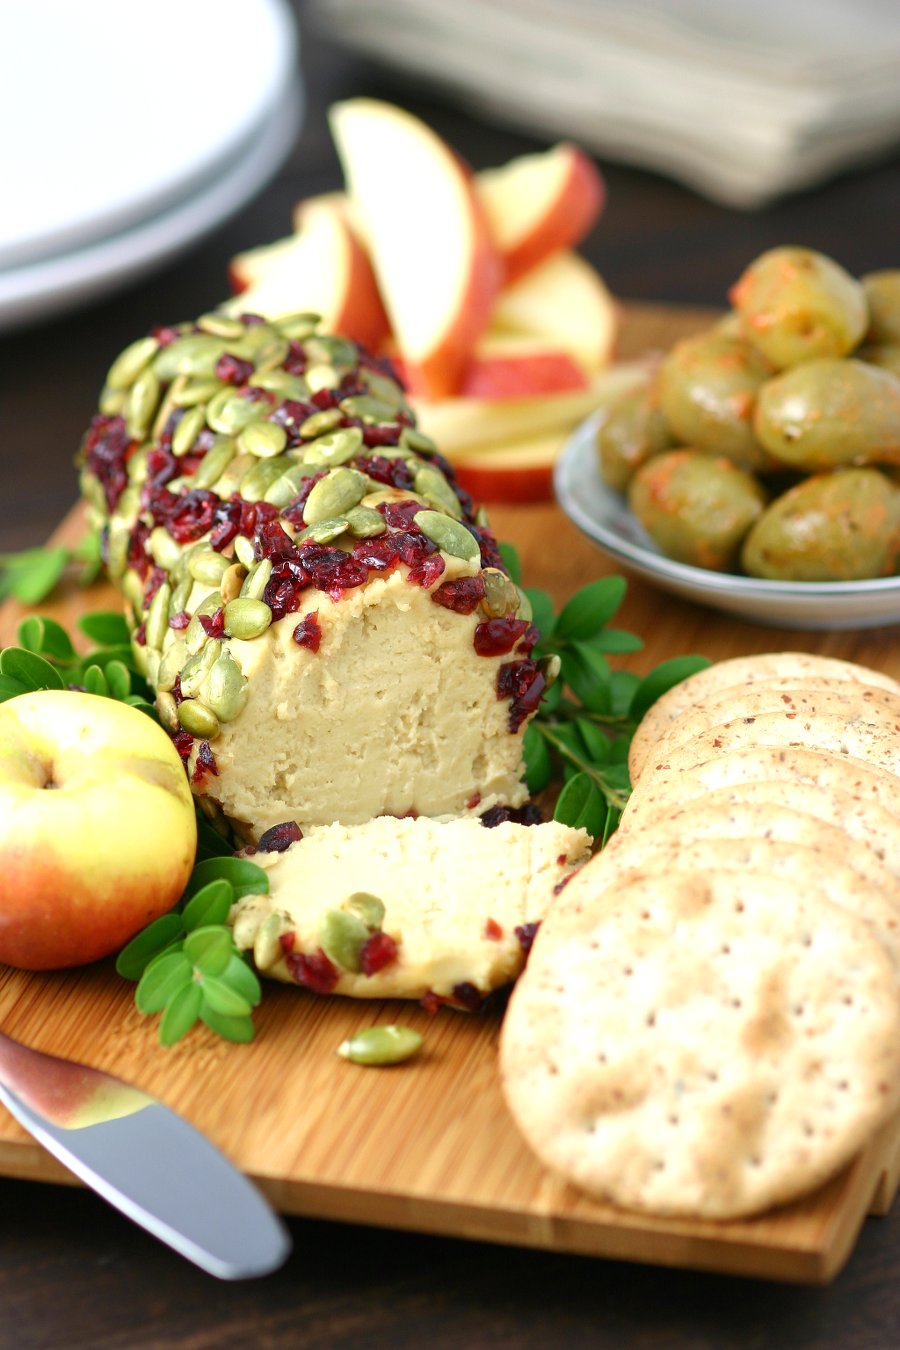 Cheese lovers rejoice! This recipe for Sharp Vegan Nut Cheese satisfies your cheesy cravings with its tangy and nutty flavor. It can even be formed into logs or balls!